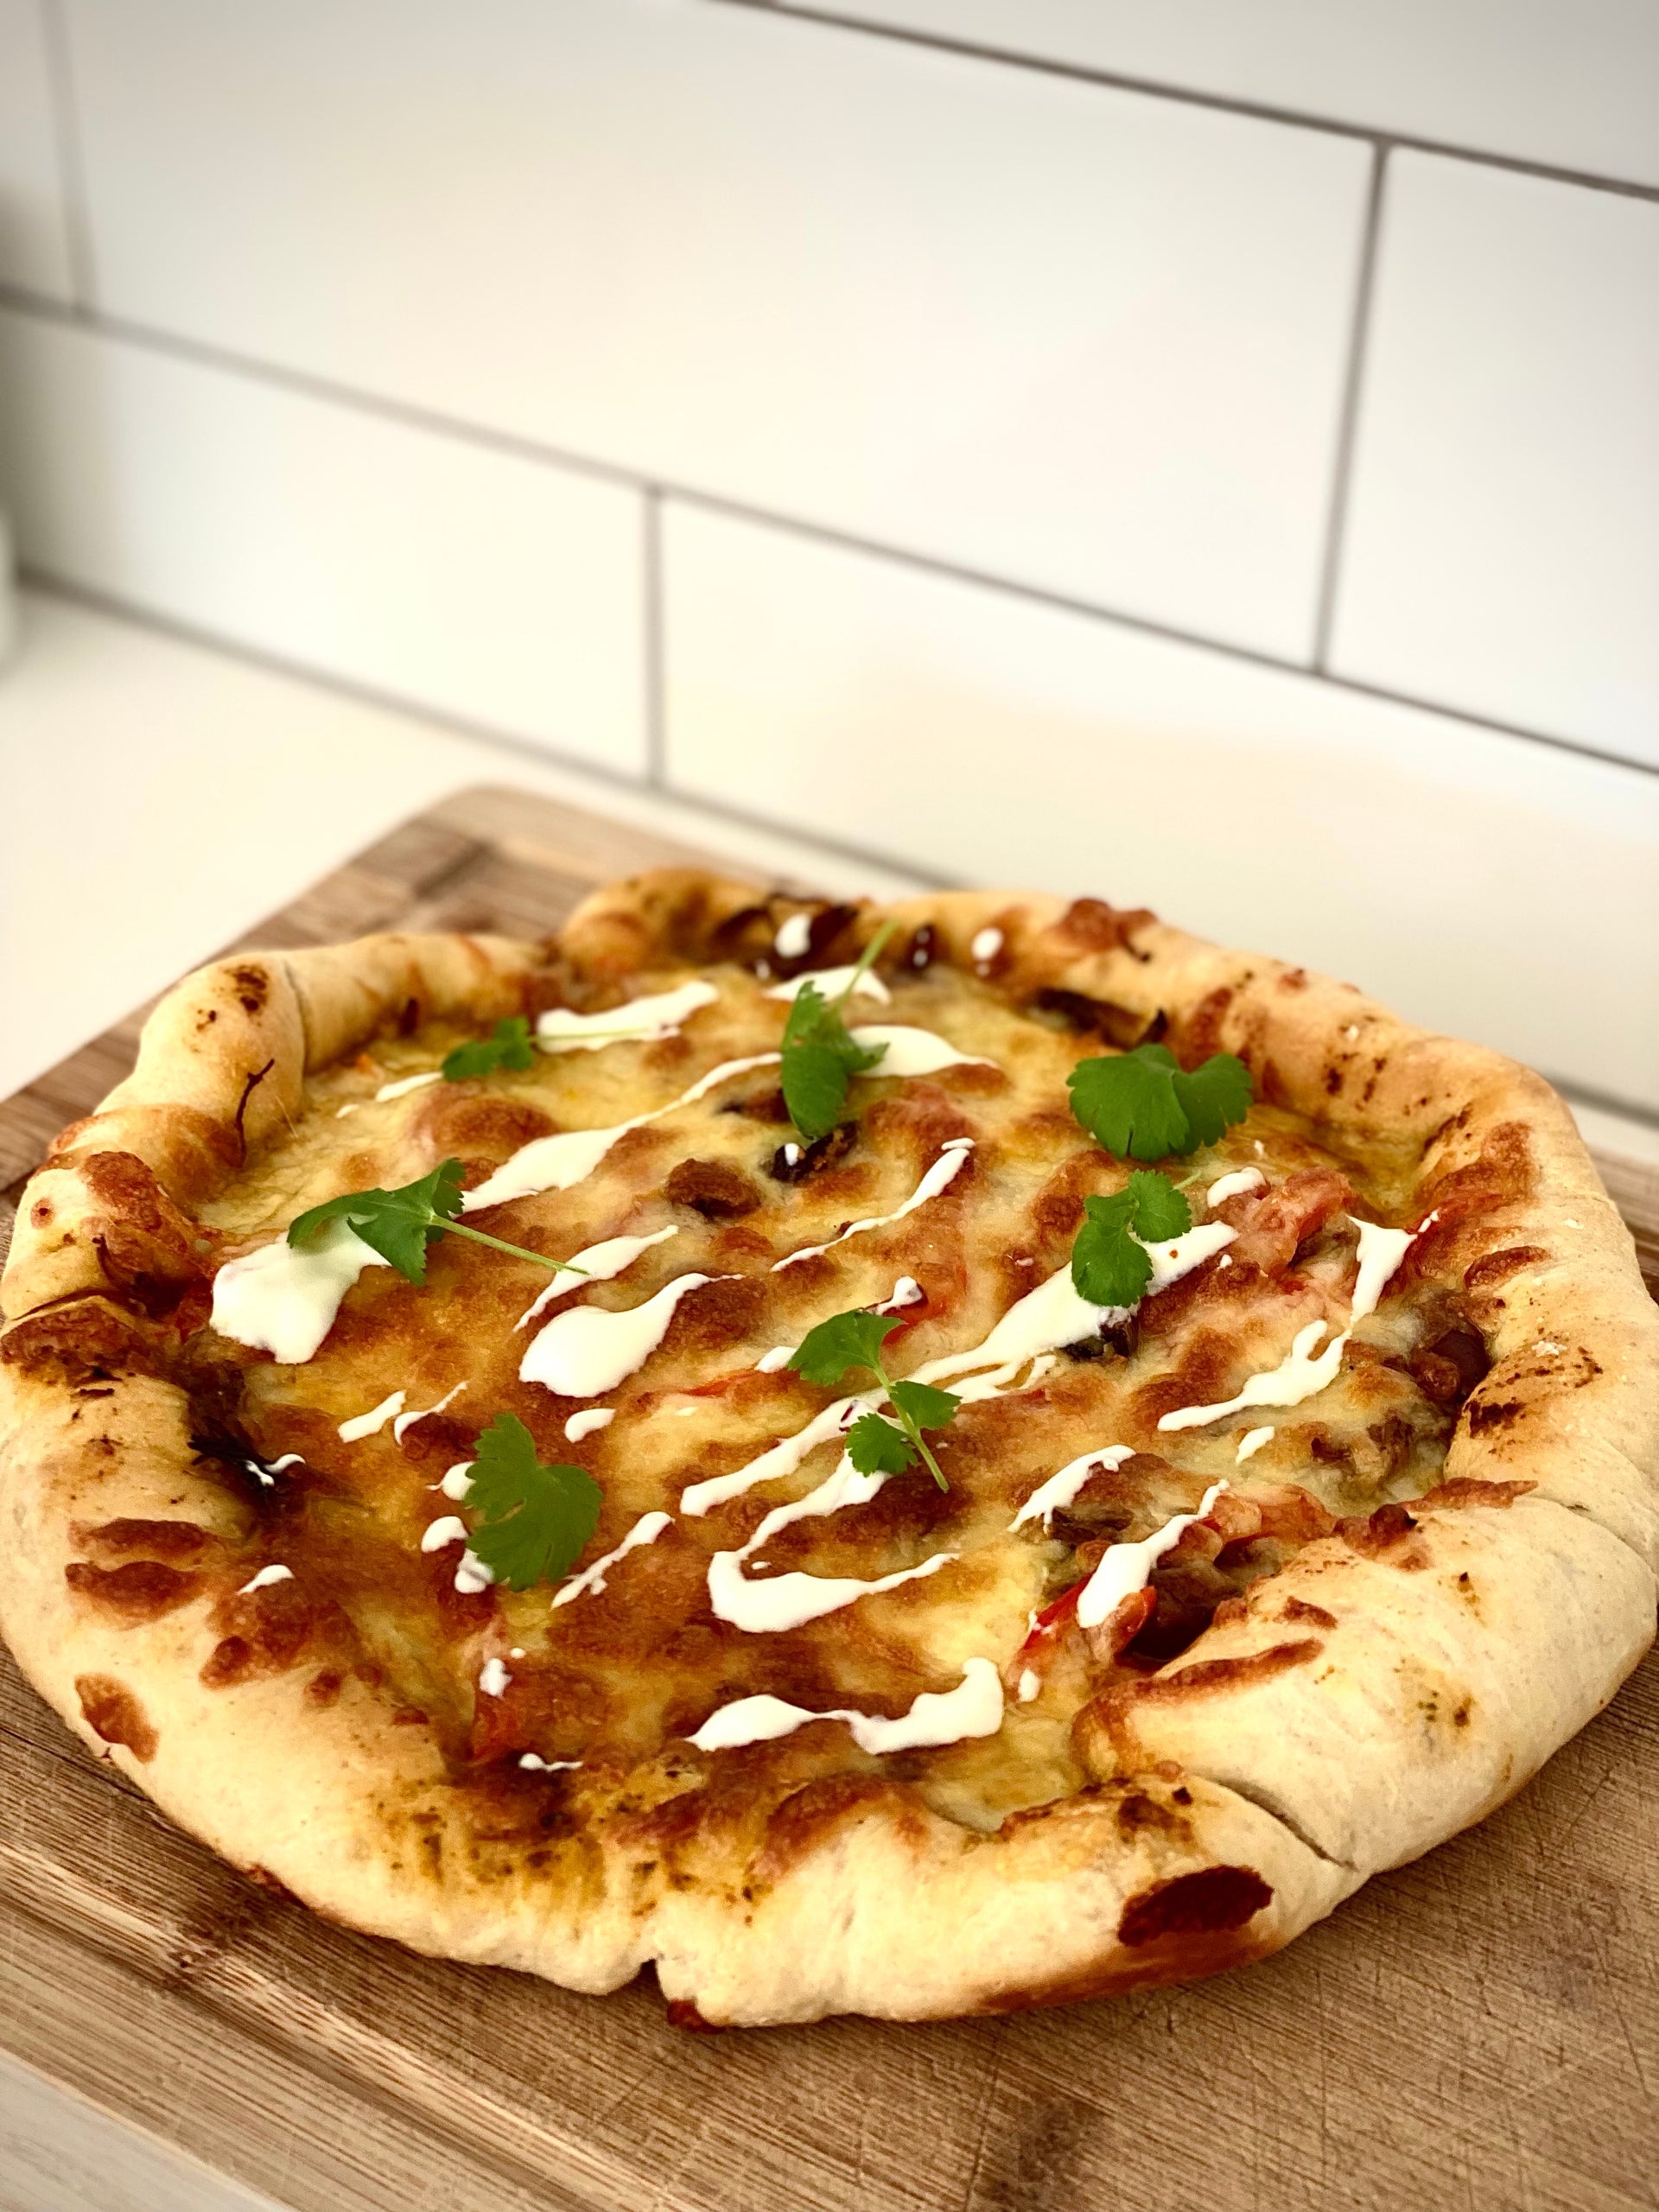 Moroccan Lamb Pizza with a cheese stuffed crust